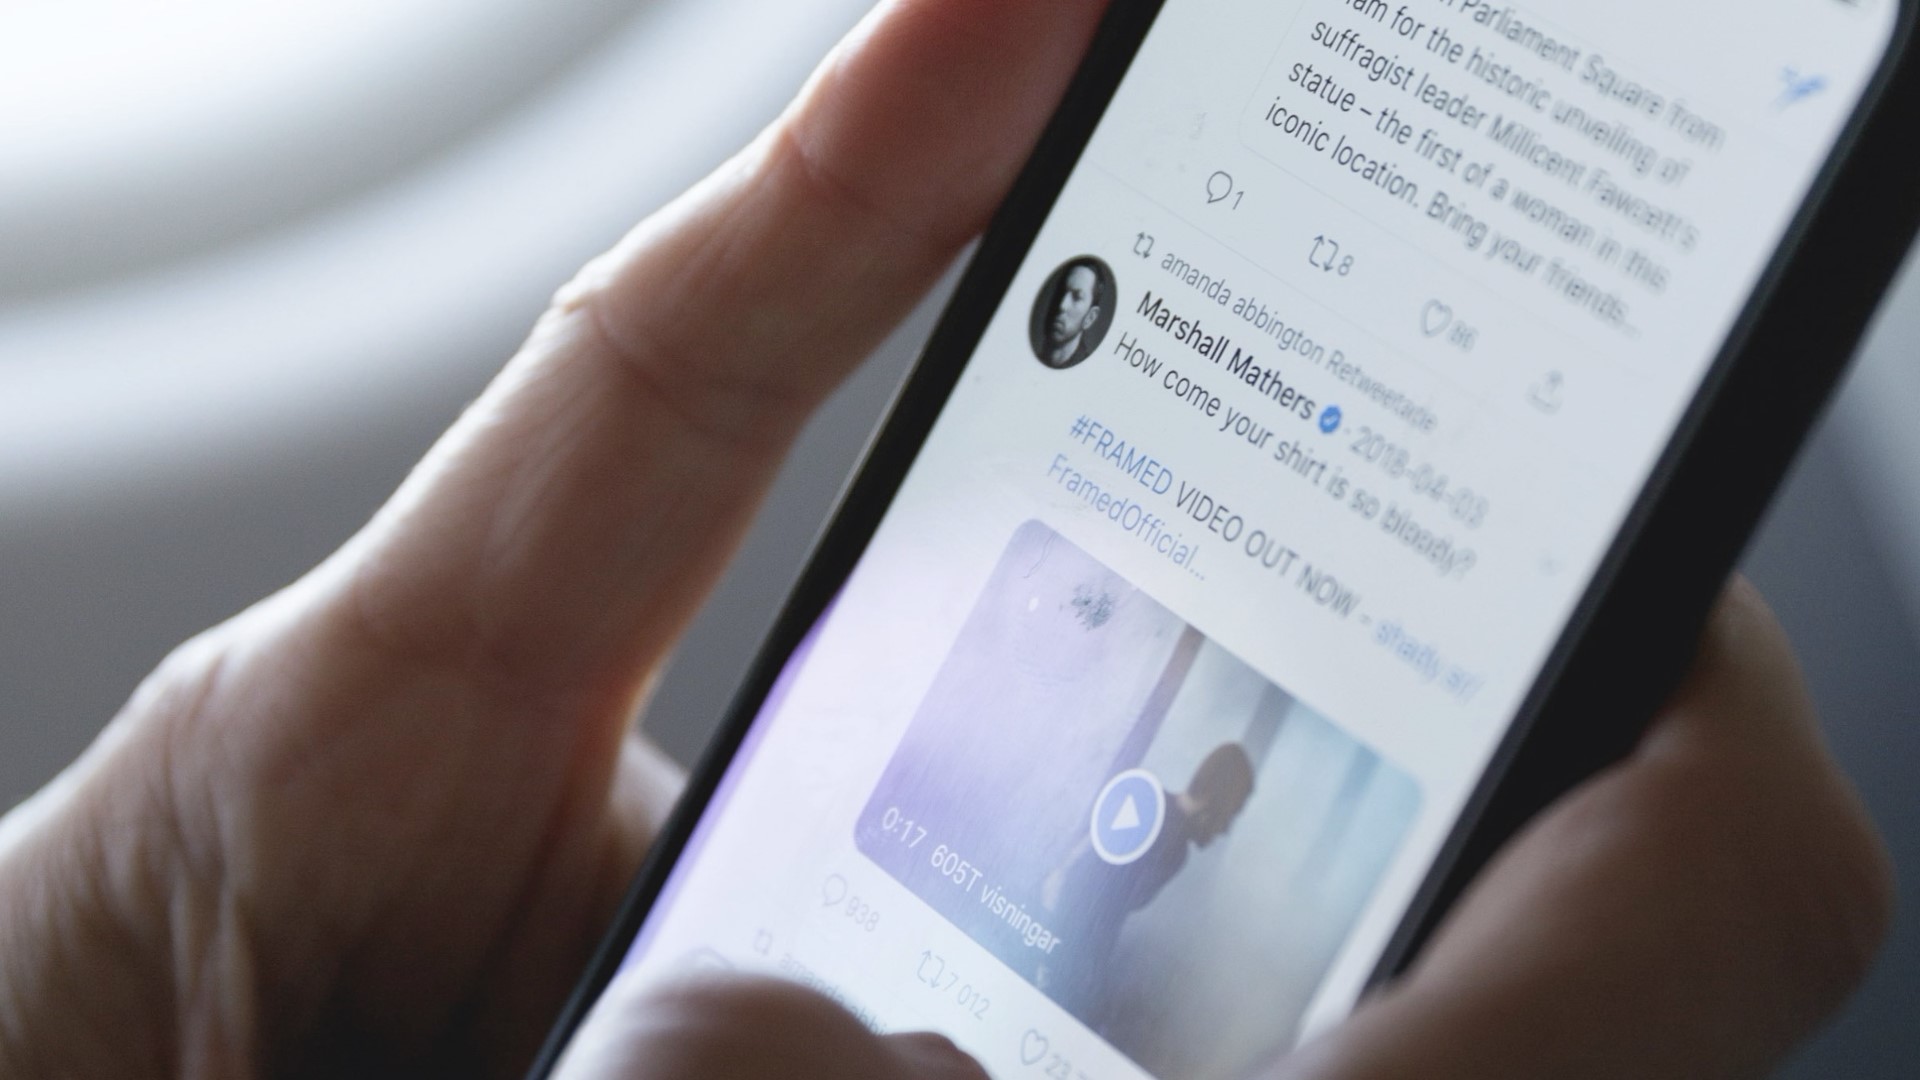 A new Twitter feature is facing some controversy, as it will allow users to hide their replies. Veuer's Justin Kircher has the story.